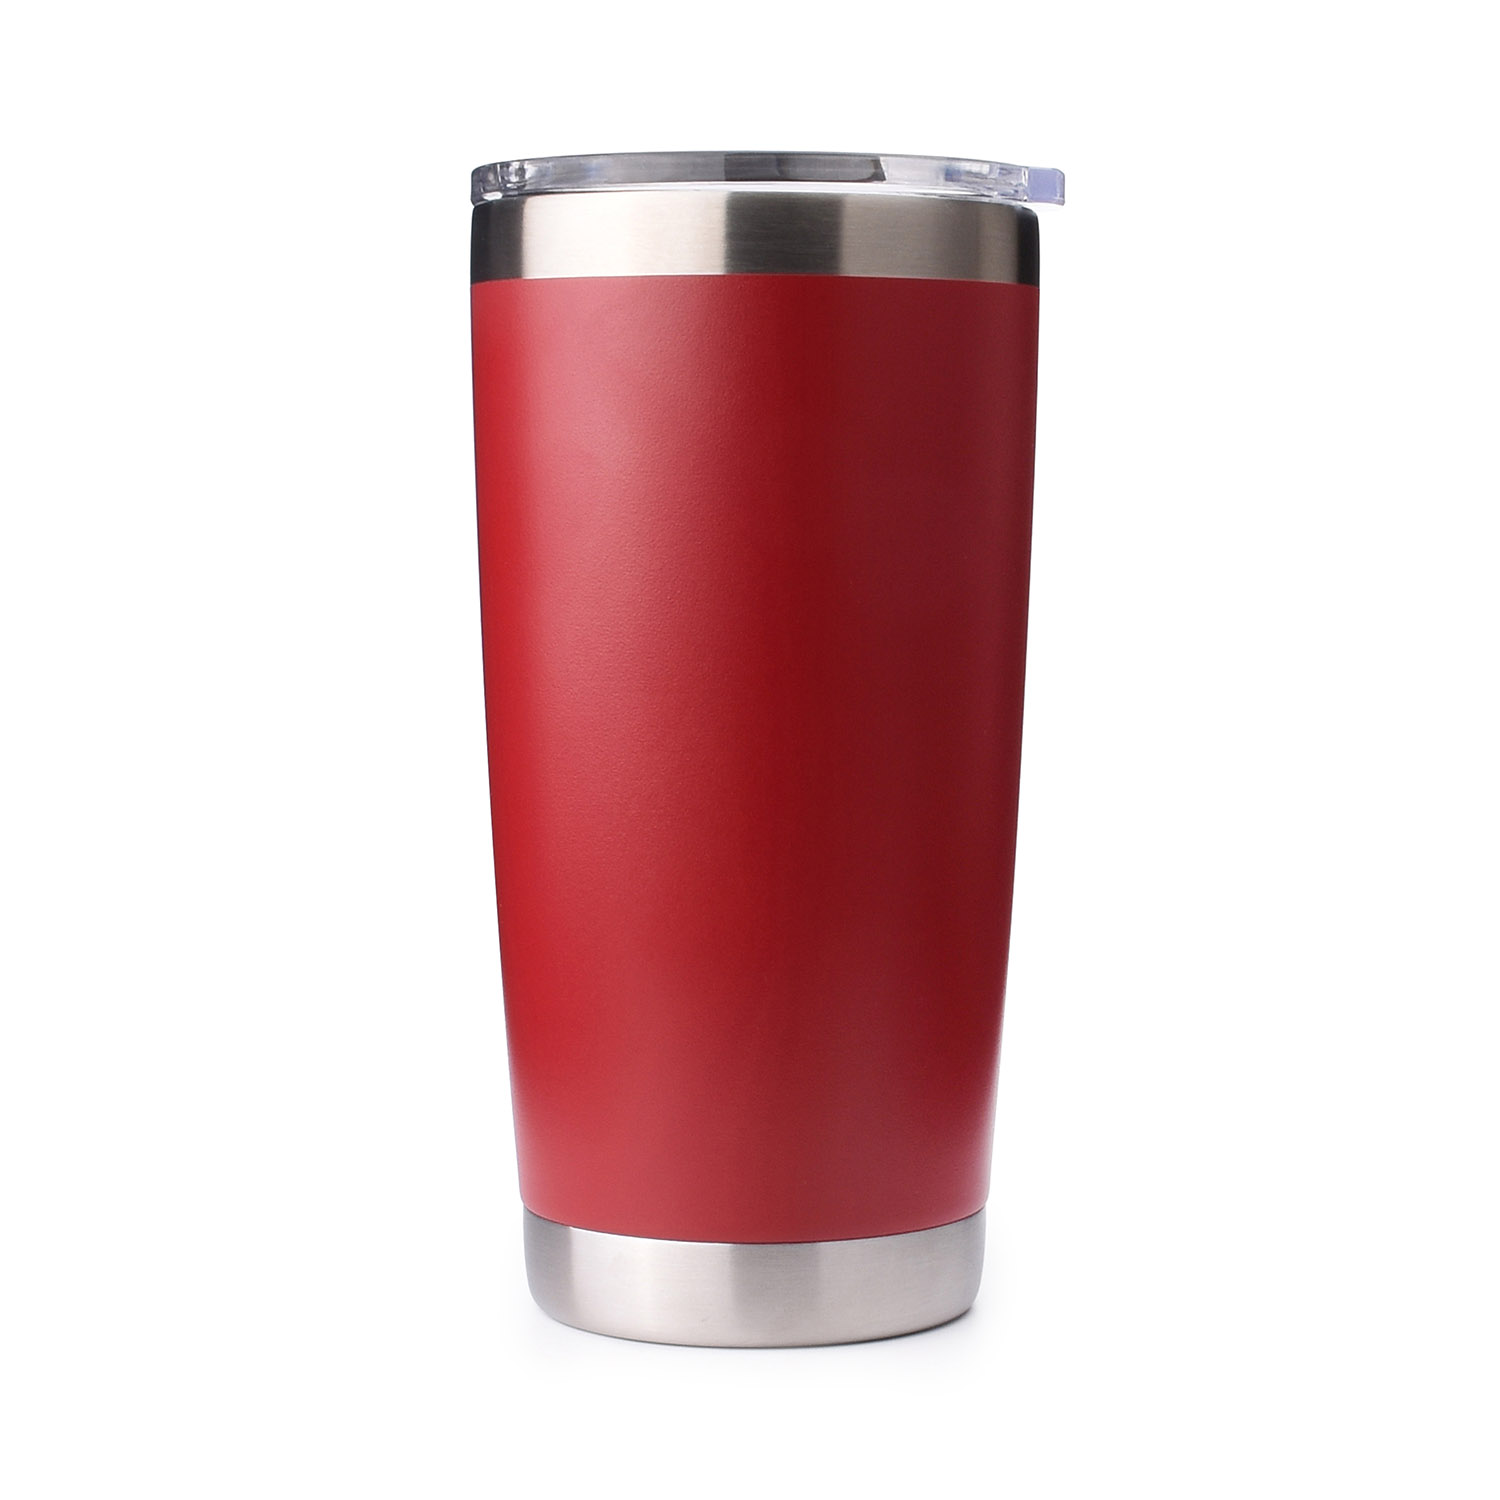 Tumbler Lid for 30 Oz Yeti Rambler, Old Style RTIC, Ozark Trails and more  Cooler Cup, Sliding Splash Proof and Straw Friendly